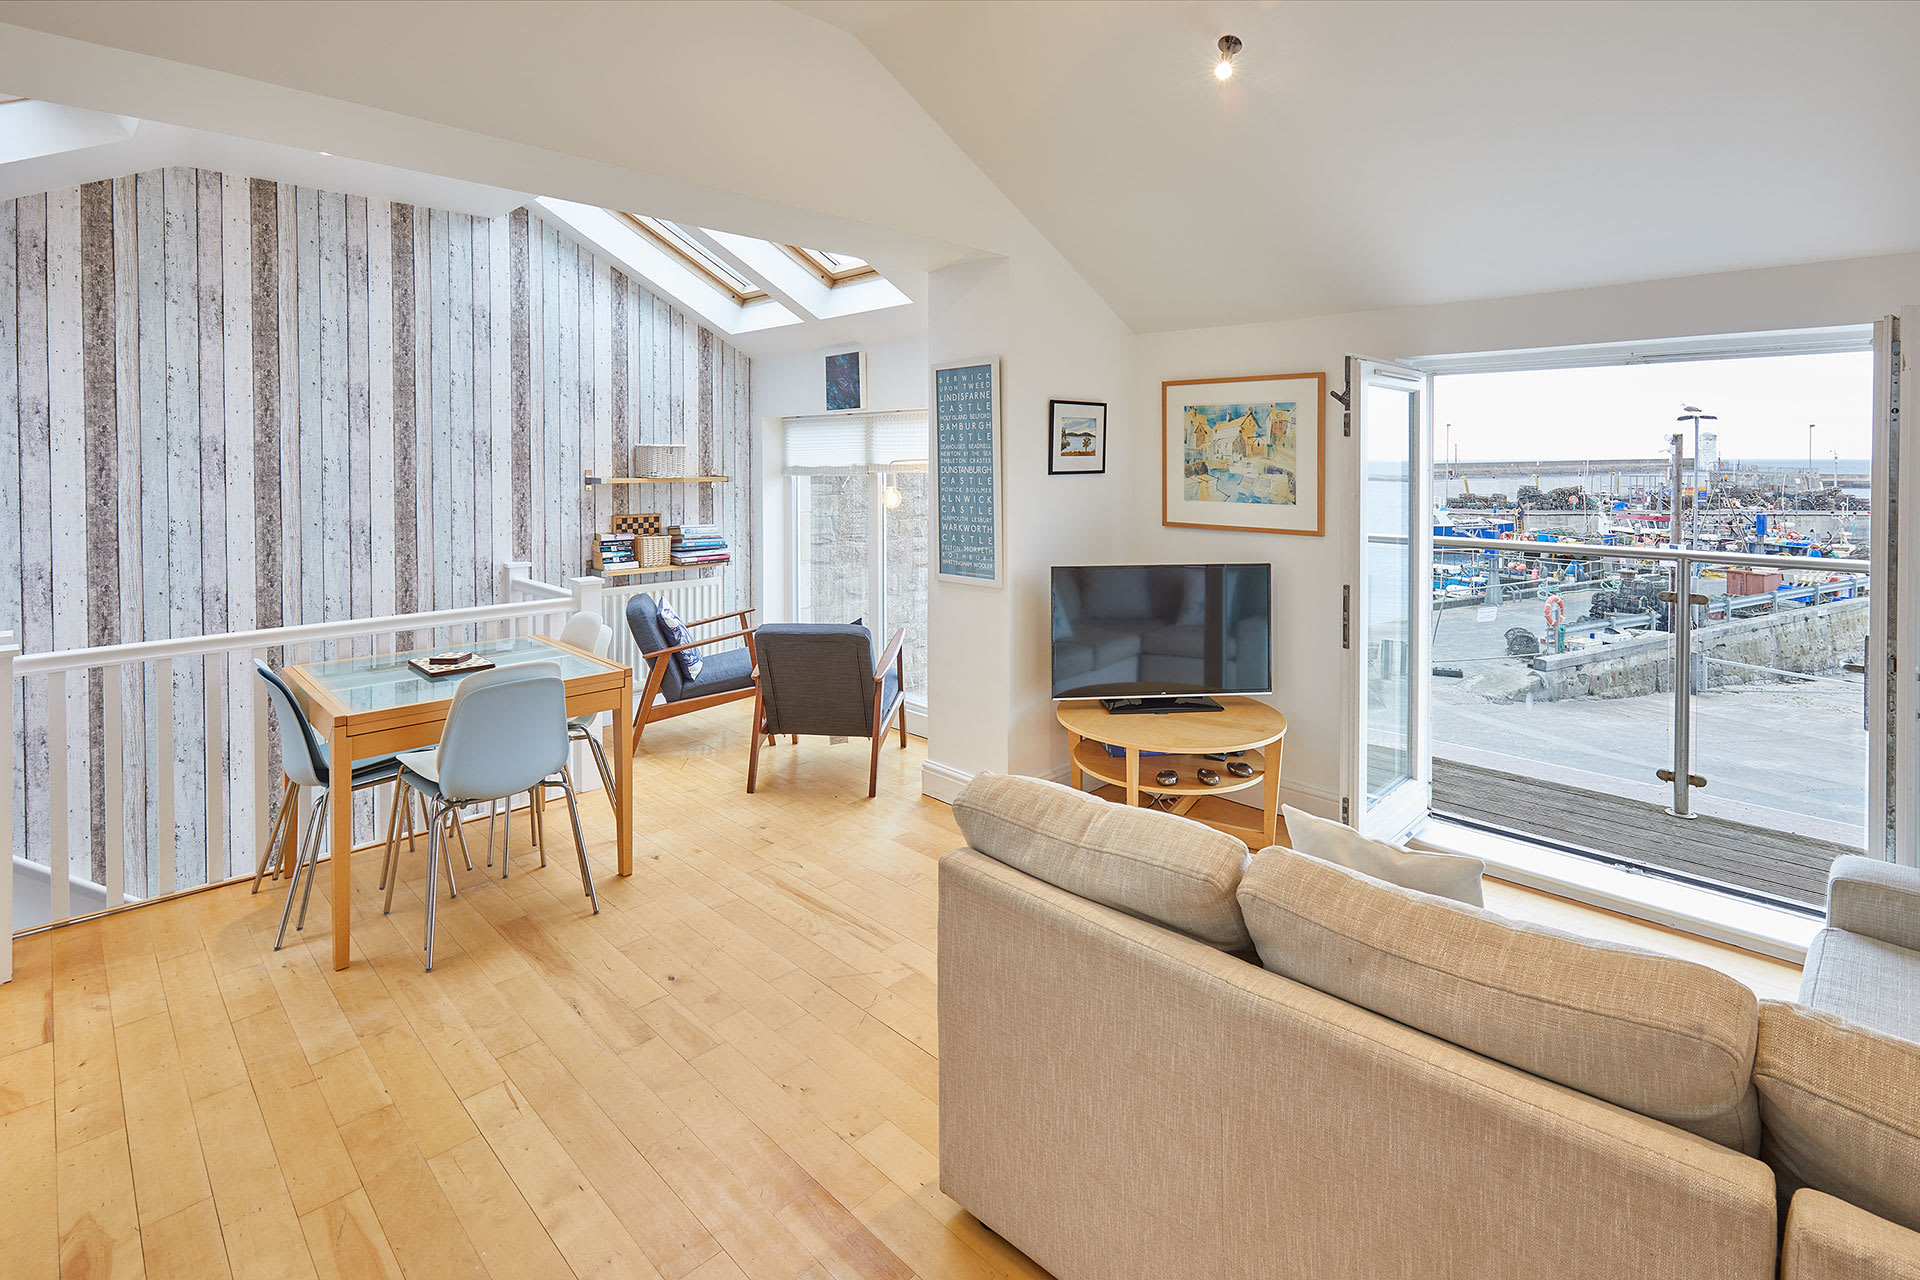 The Plaice, Seahouses - Host & Stay